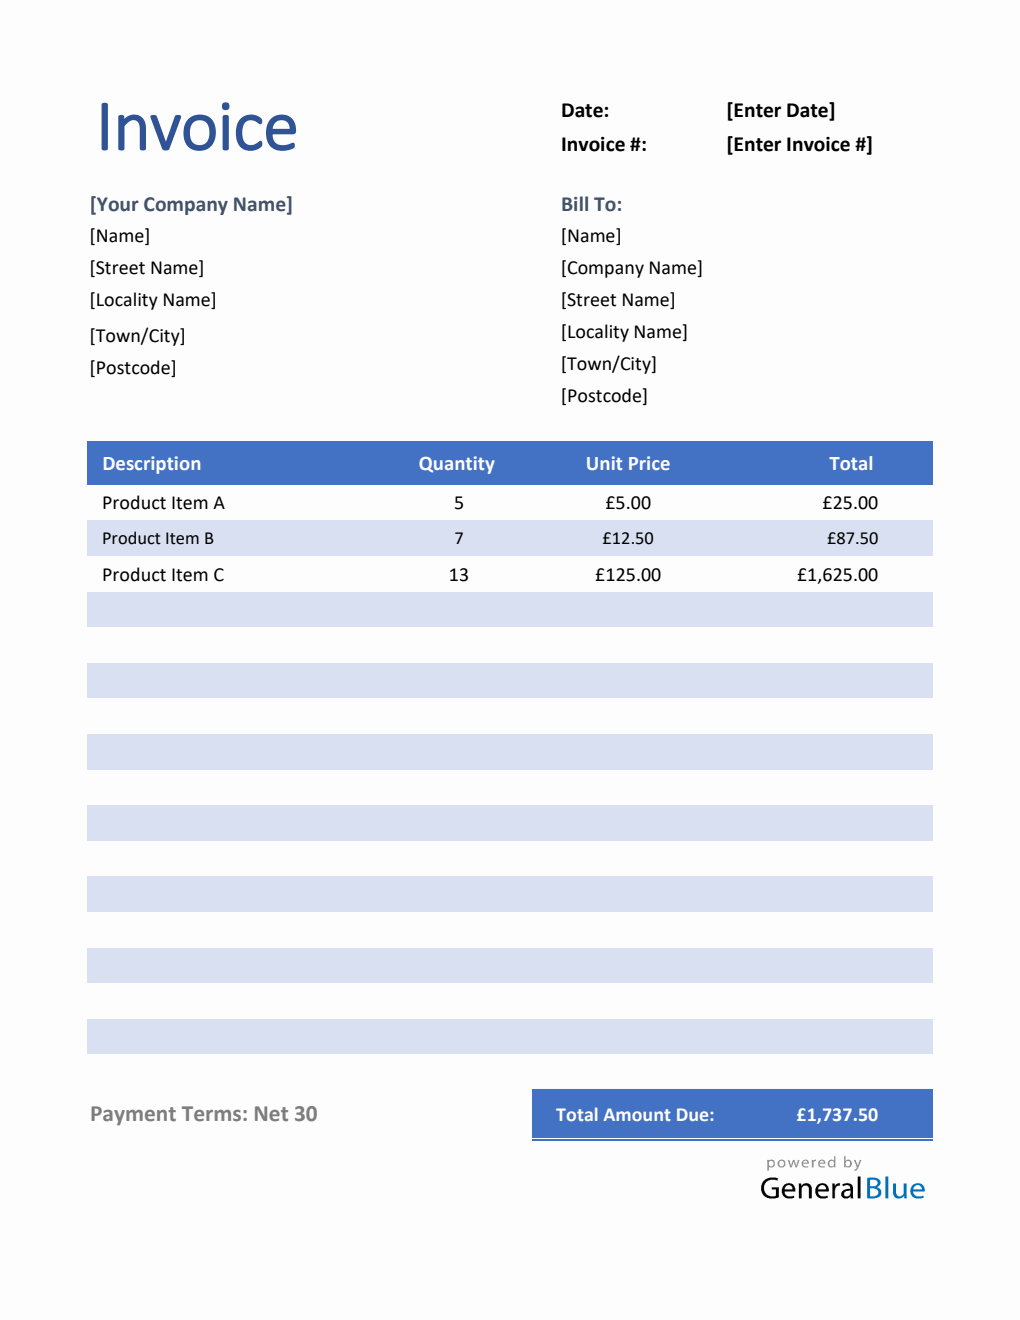 Invoice Template for U.K. in Excel (Striped)